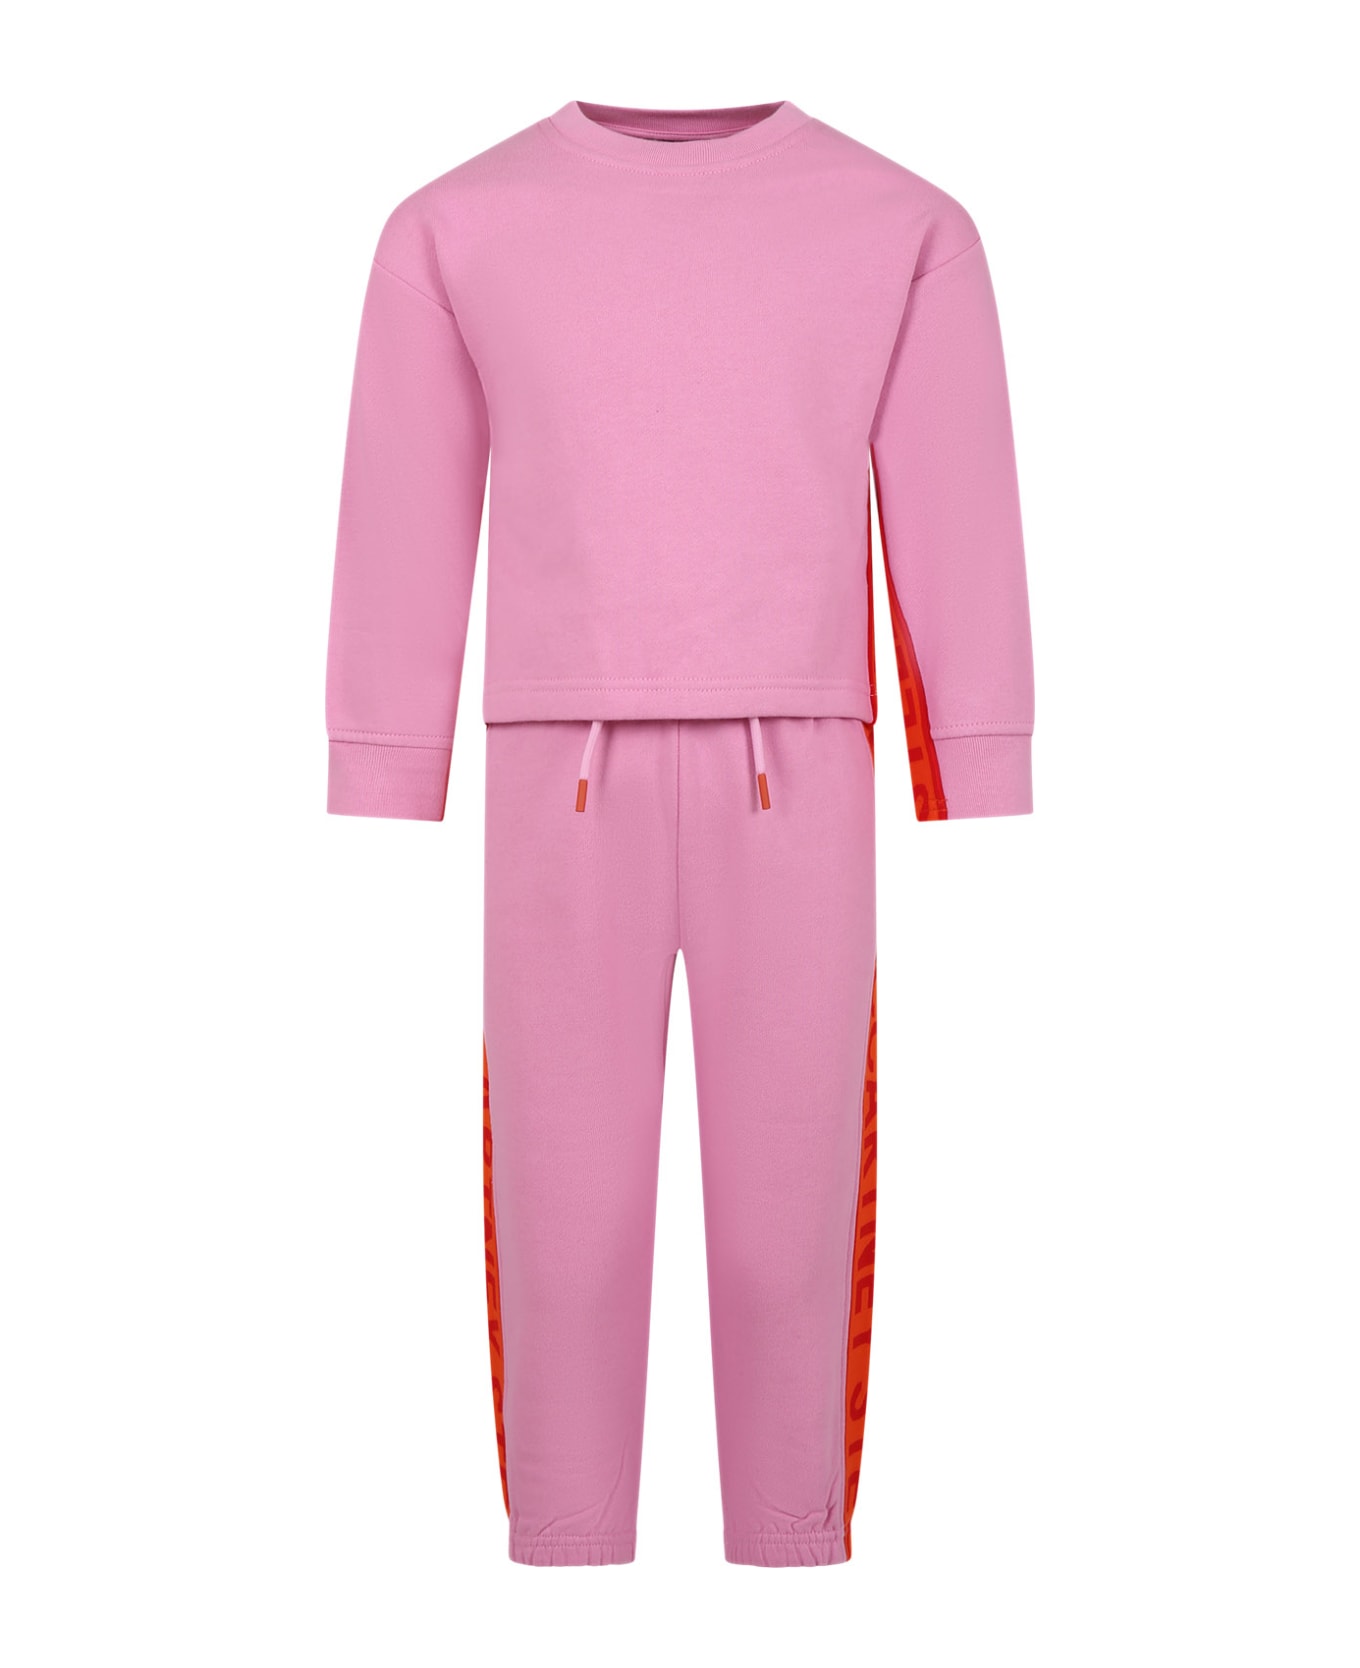 Stella McCartney Kids Pink Outfit For Girl With Logo - Pink